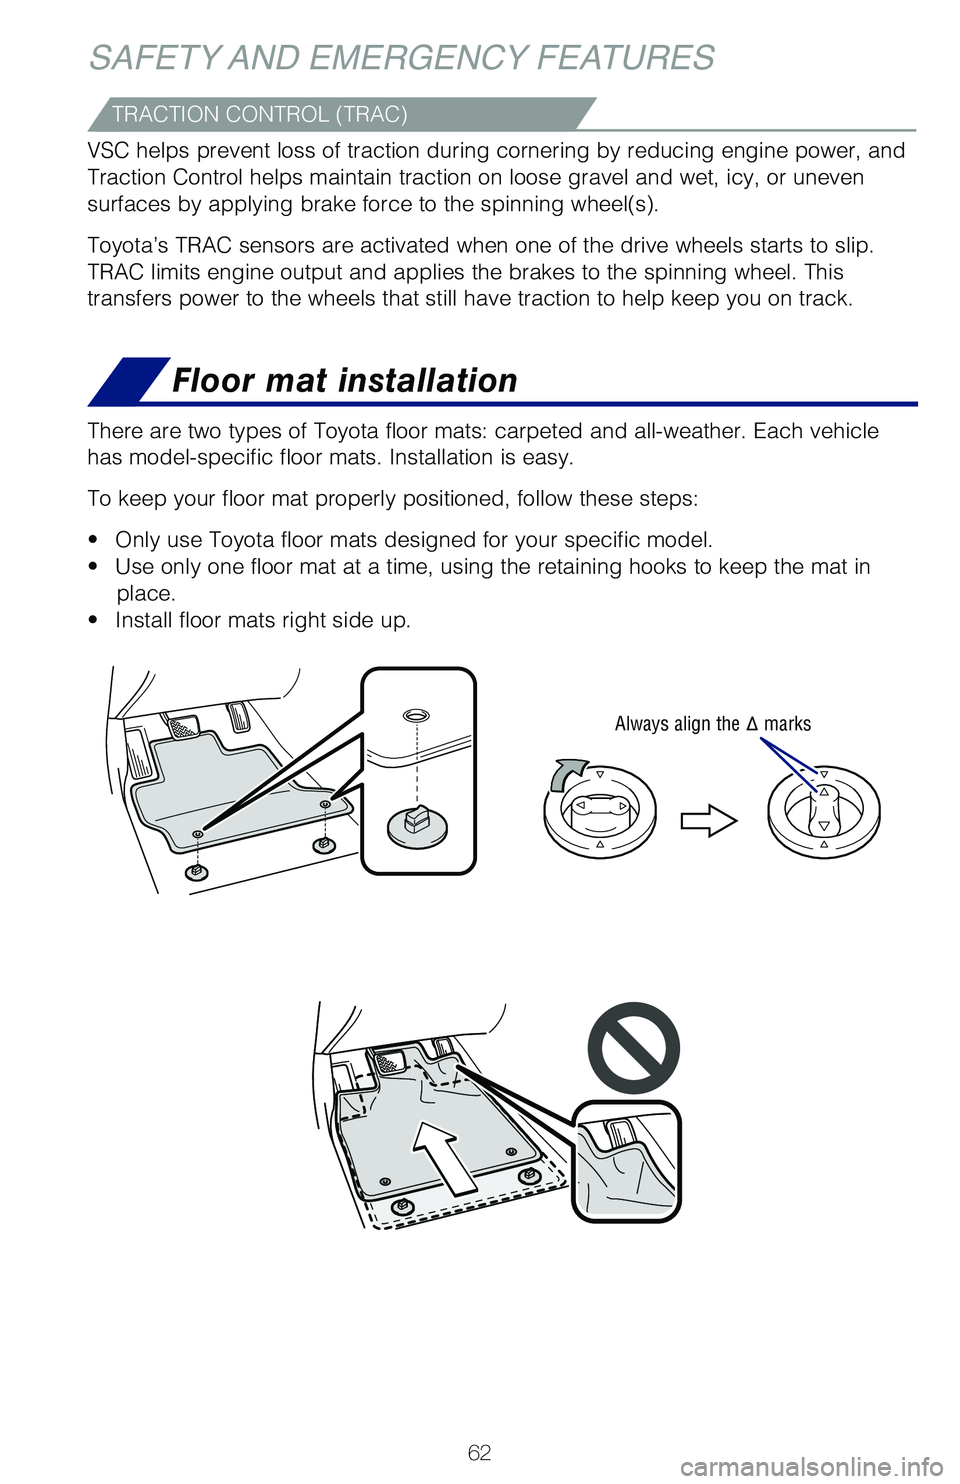 TOYOTA HIGHLANDER HYBRID 2021  Owners Manual (in English) 62
Floor mat installation
SAFETY AND EMERGENCY FEATURES
There are two types of Toyota floor mats: carpeted and all-weather. Each\� vehicle 
has model-specific floor mats. Installation is easy. 
To k